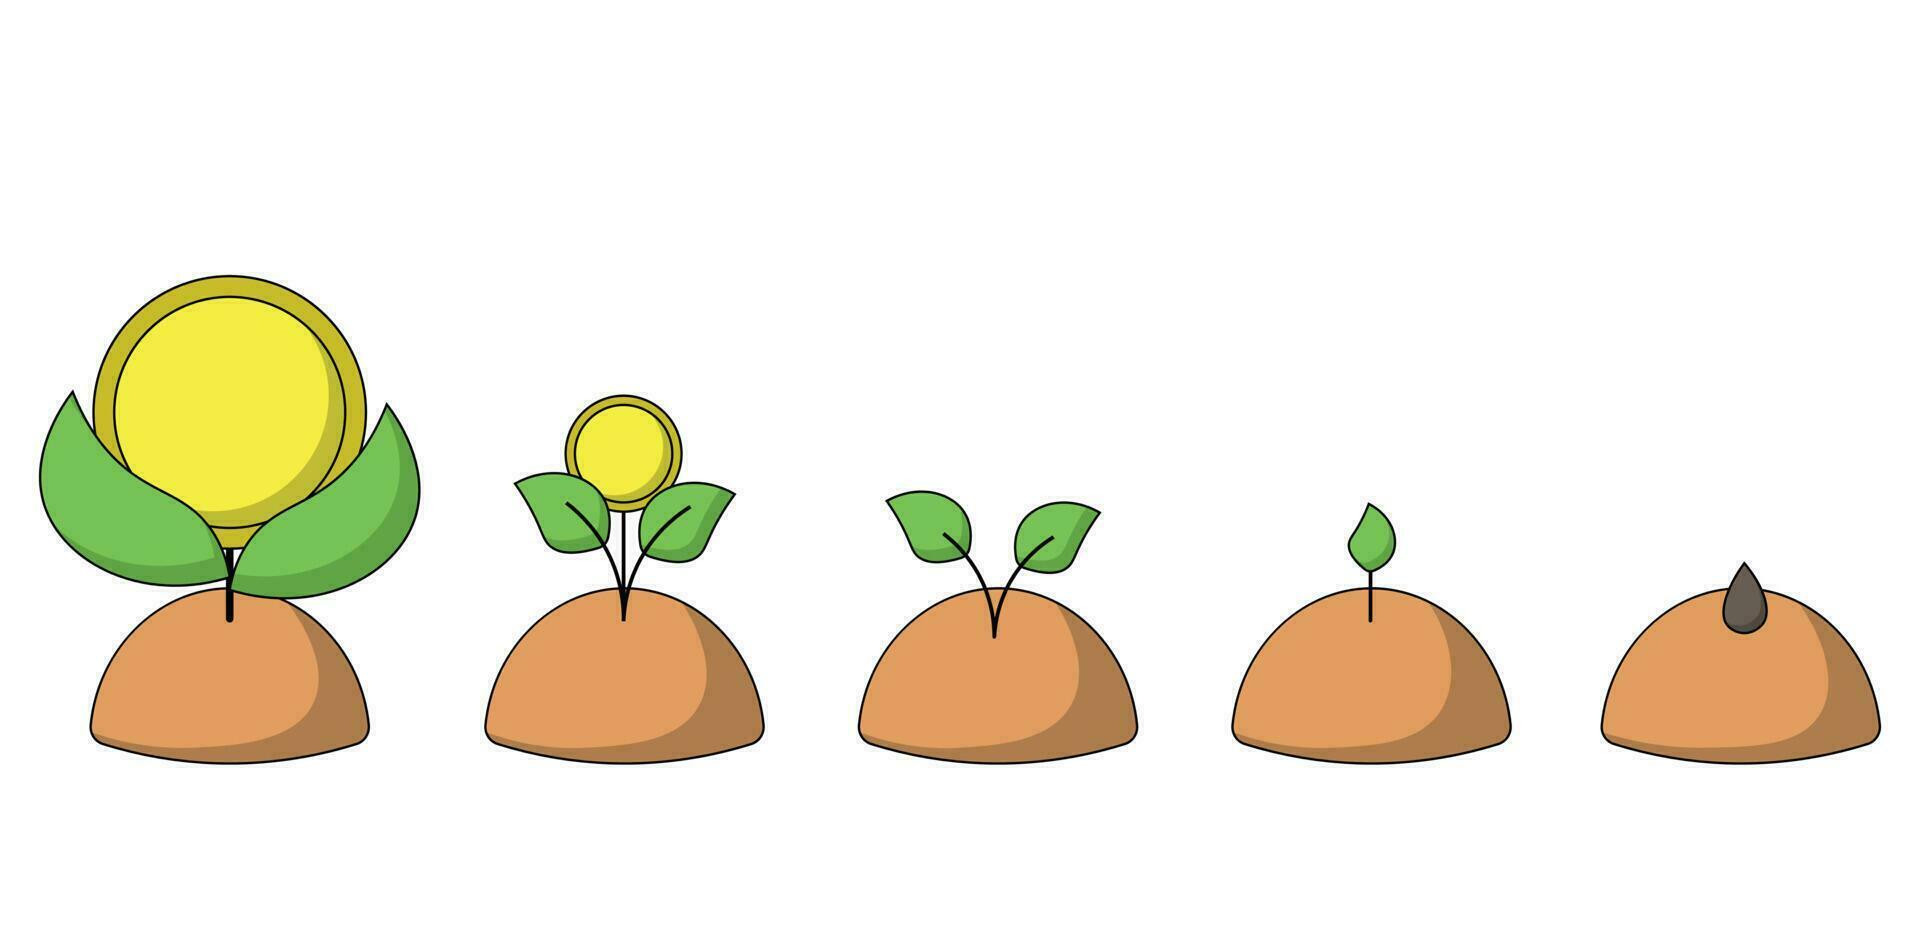 Stages of growth of a sprout from a seed to a coin-shaped flower in color vector